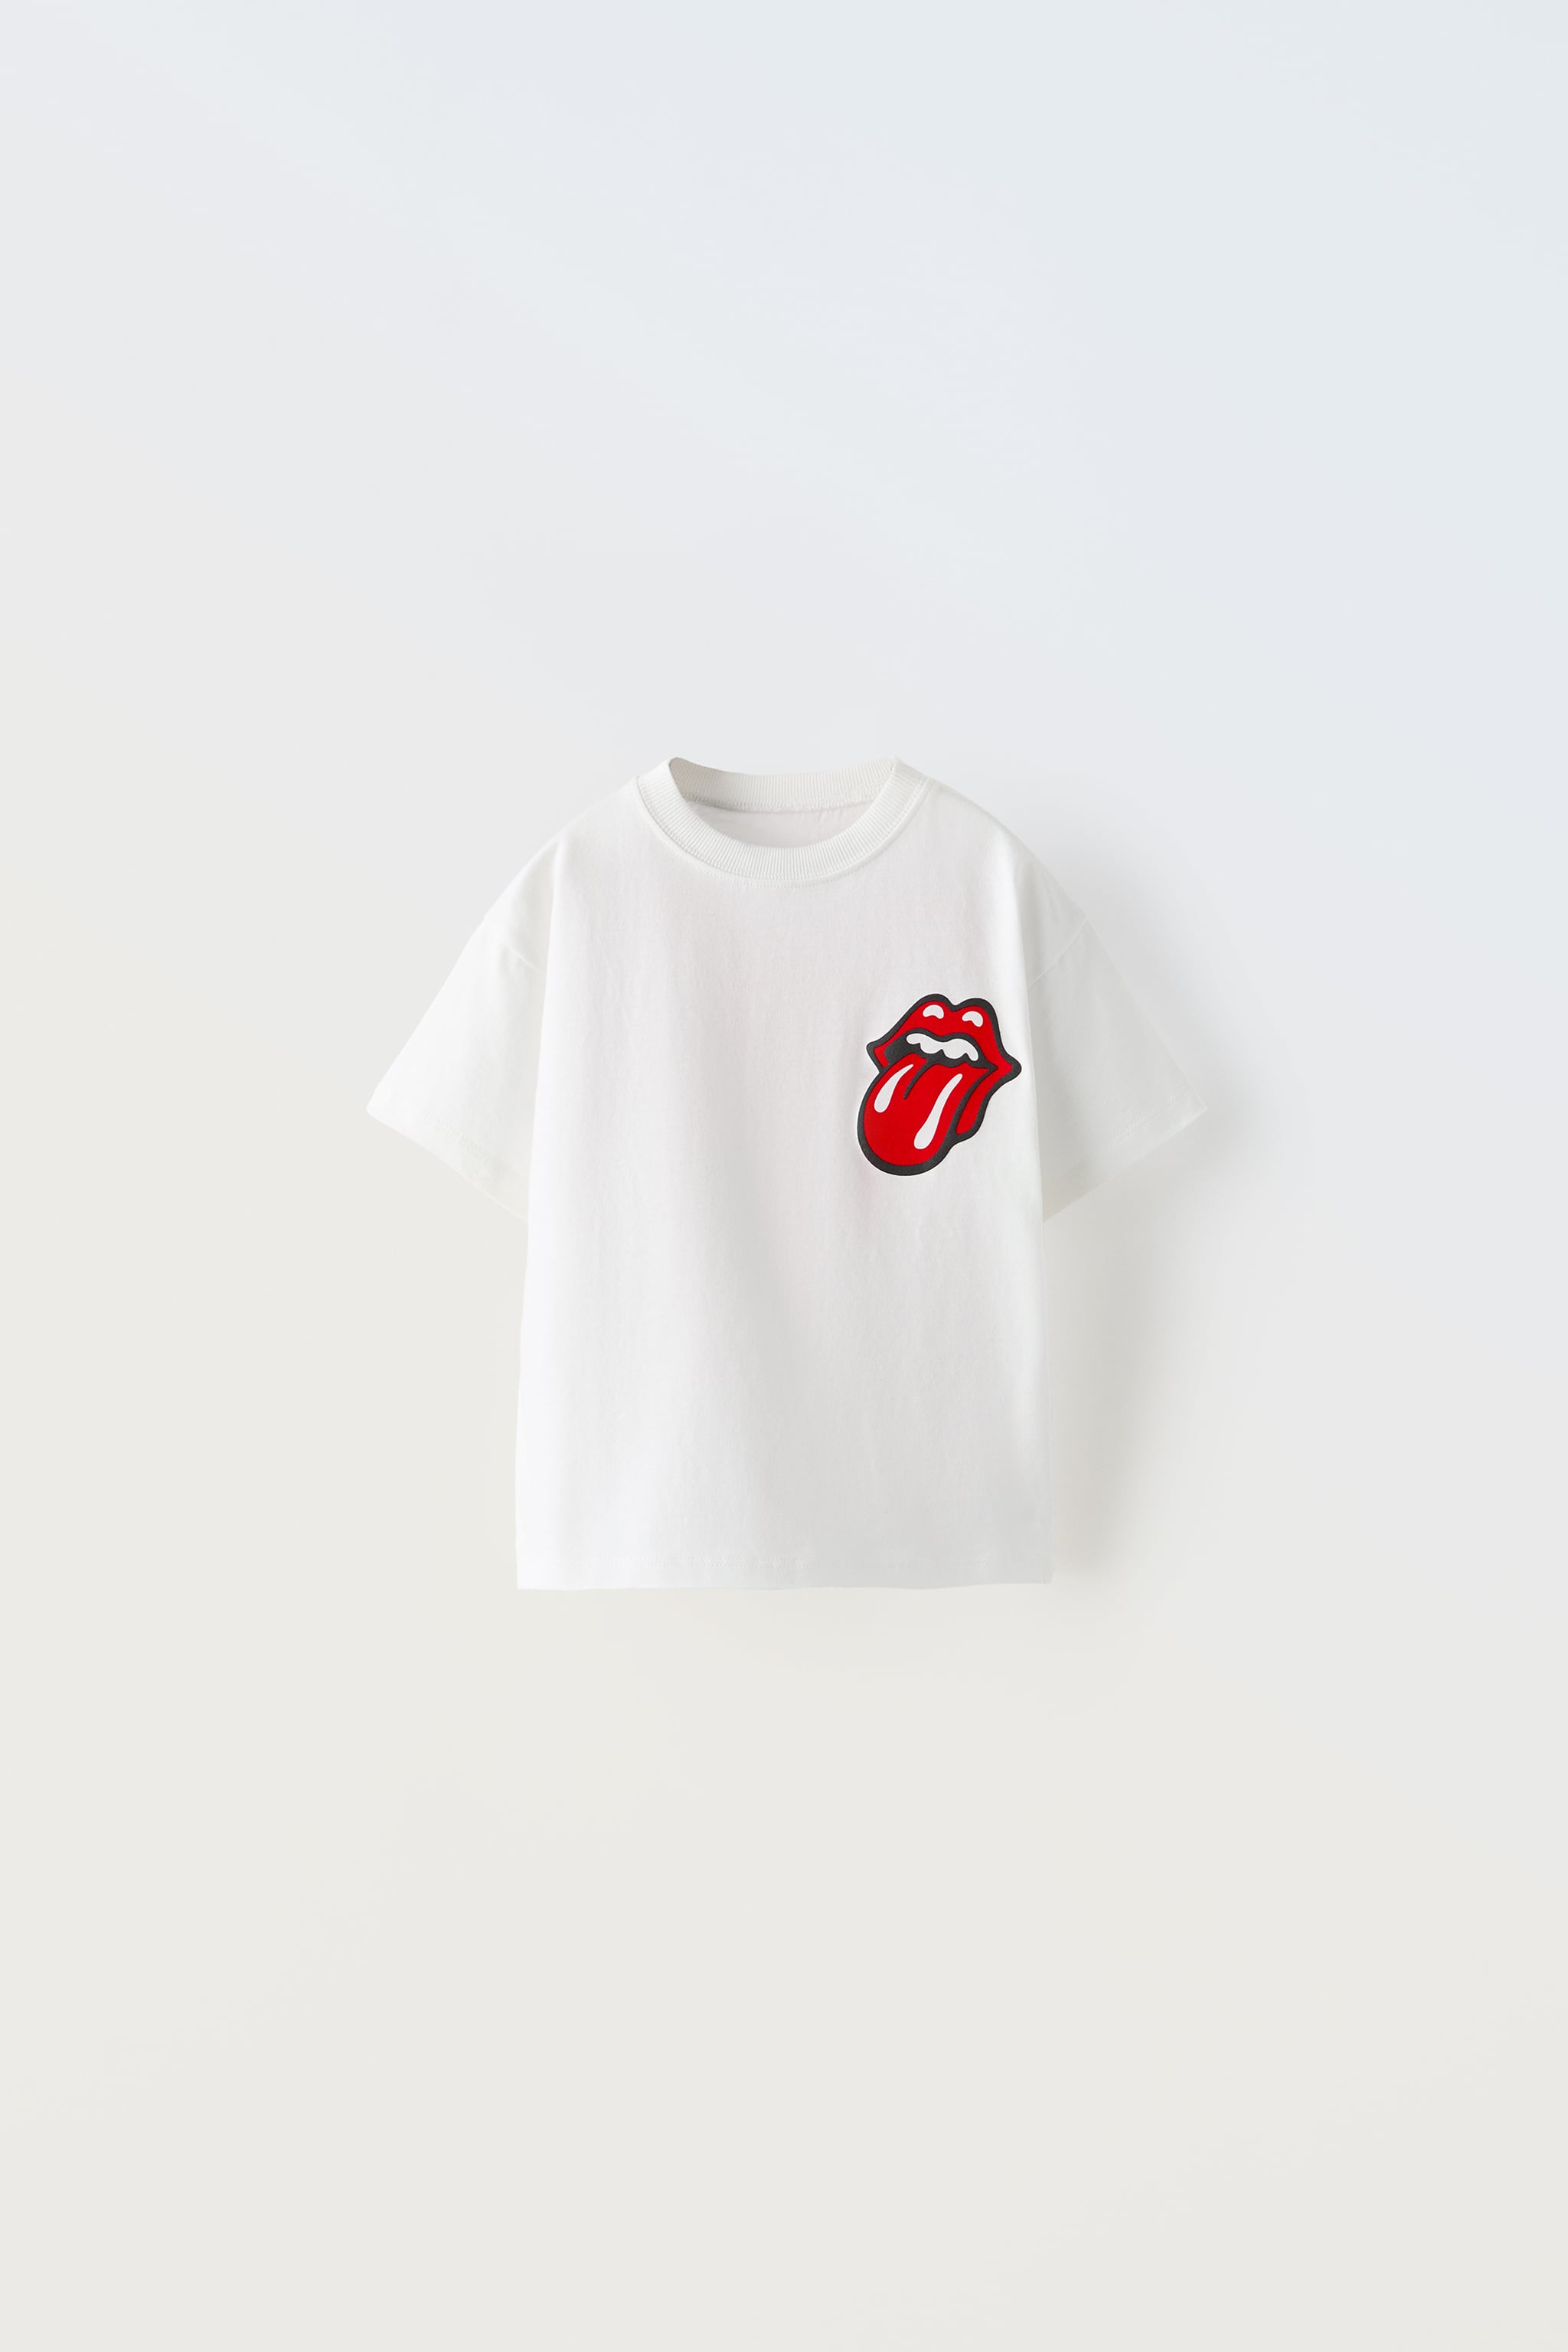 THE ROLLING STONES ® T-SHIRT